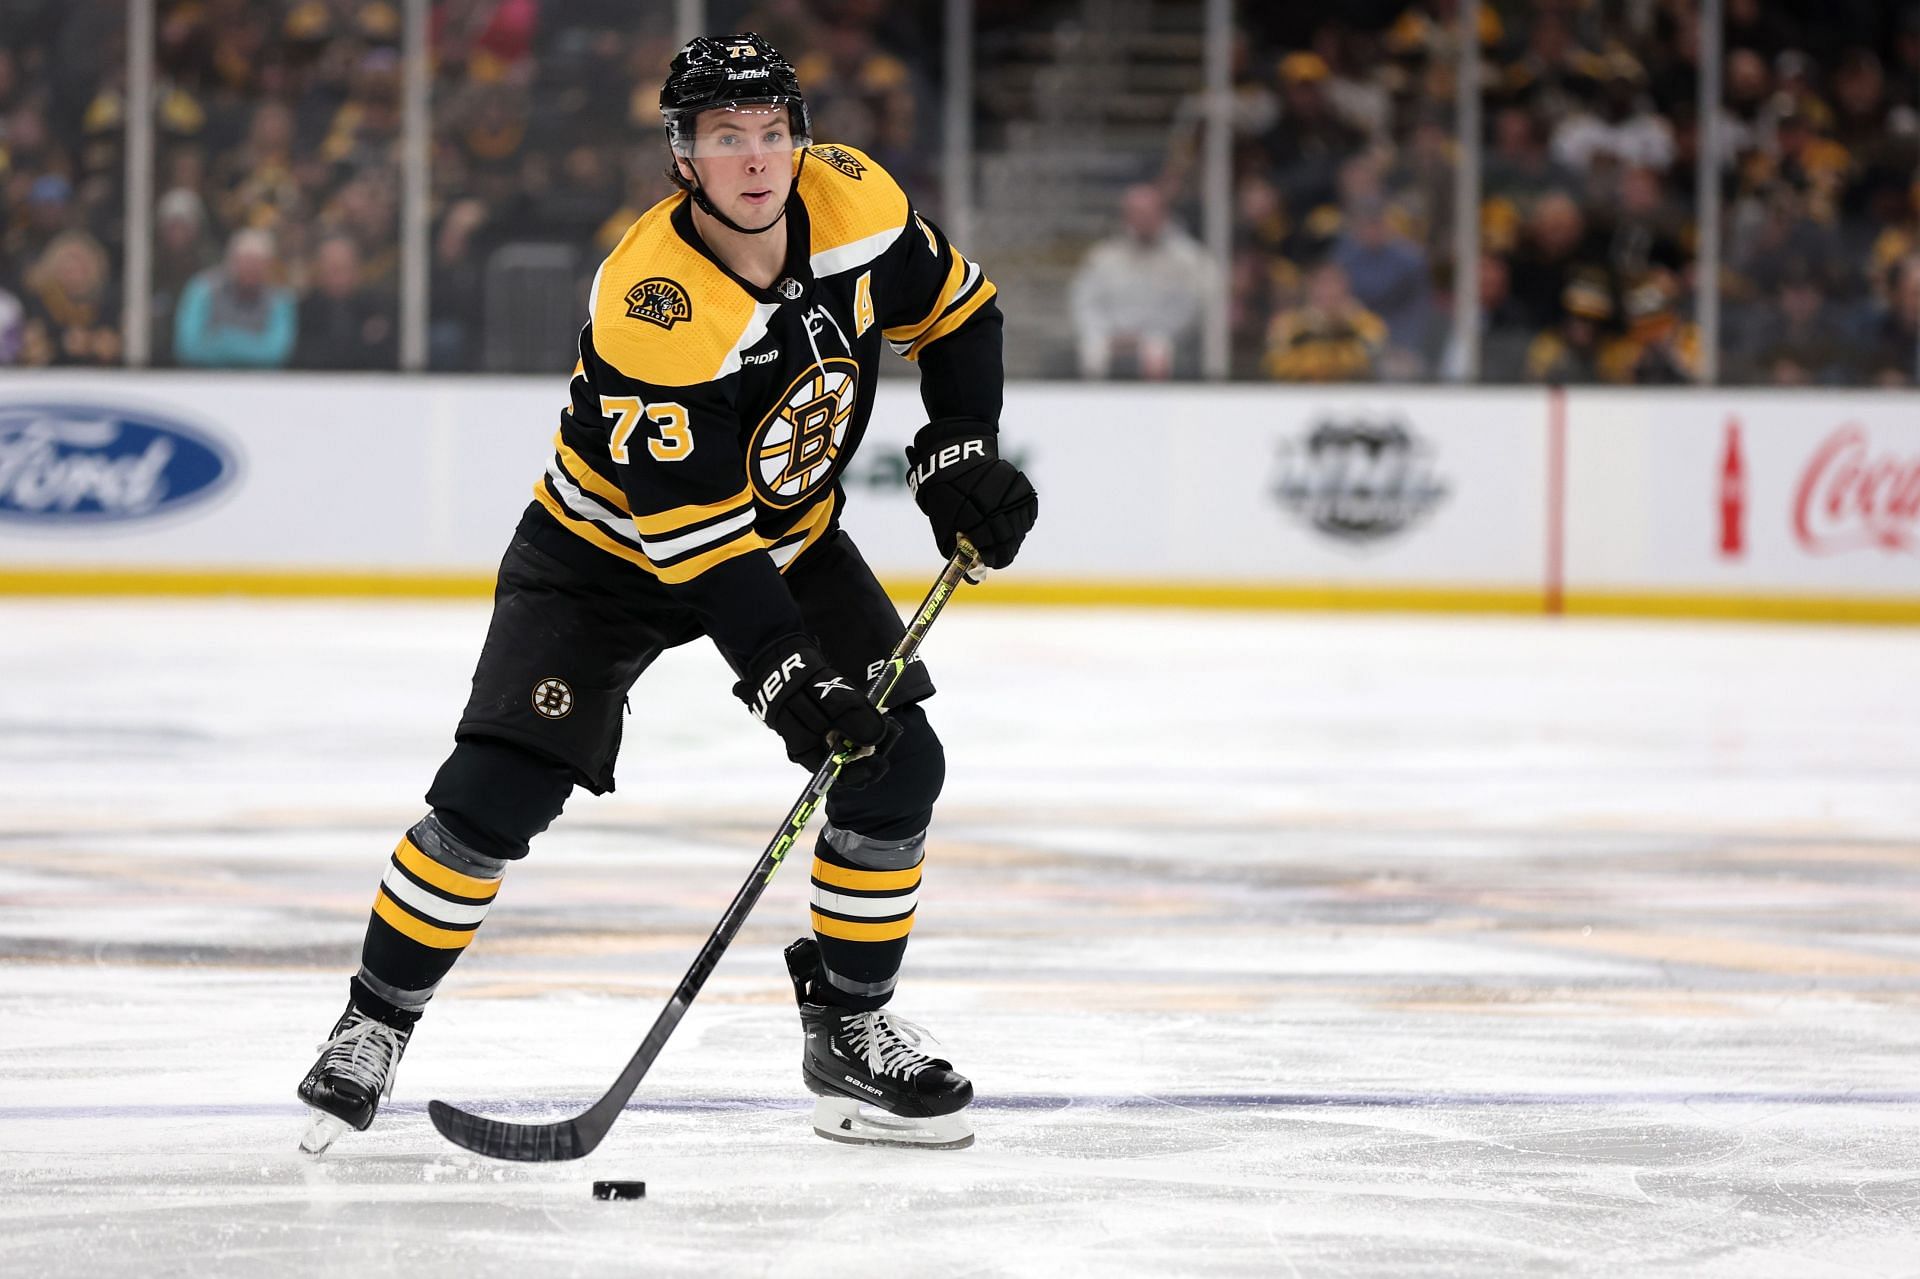 3 things we learned from Bruins star Charlie McAvoy's ESPN interview